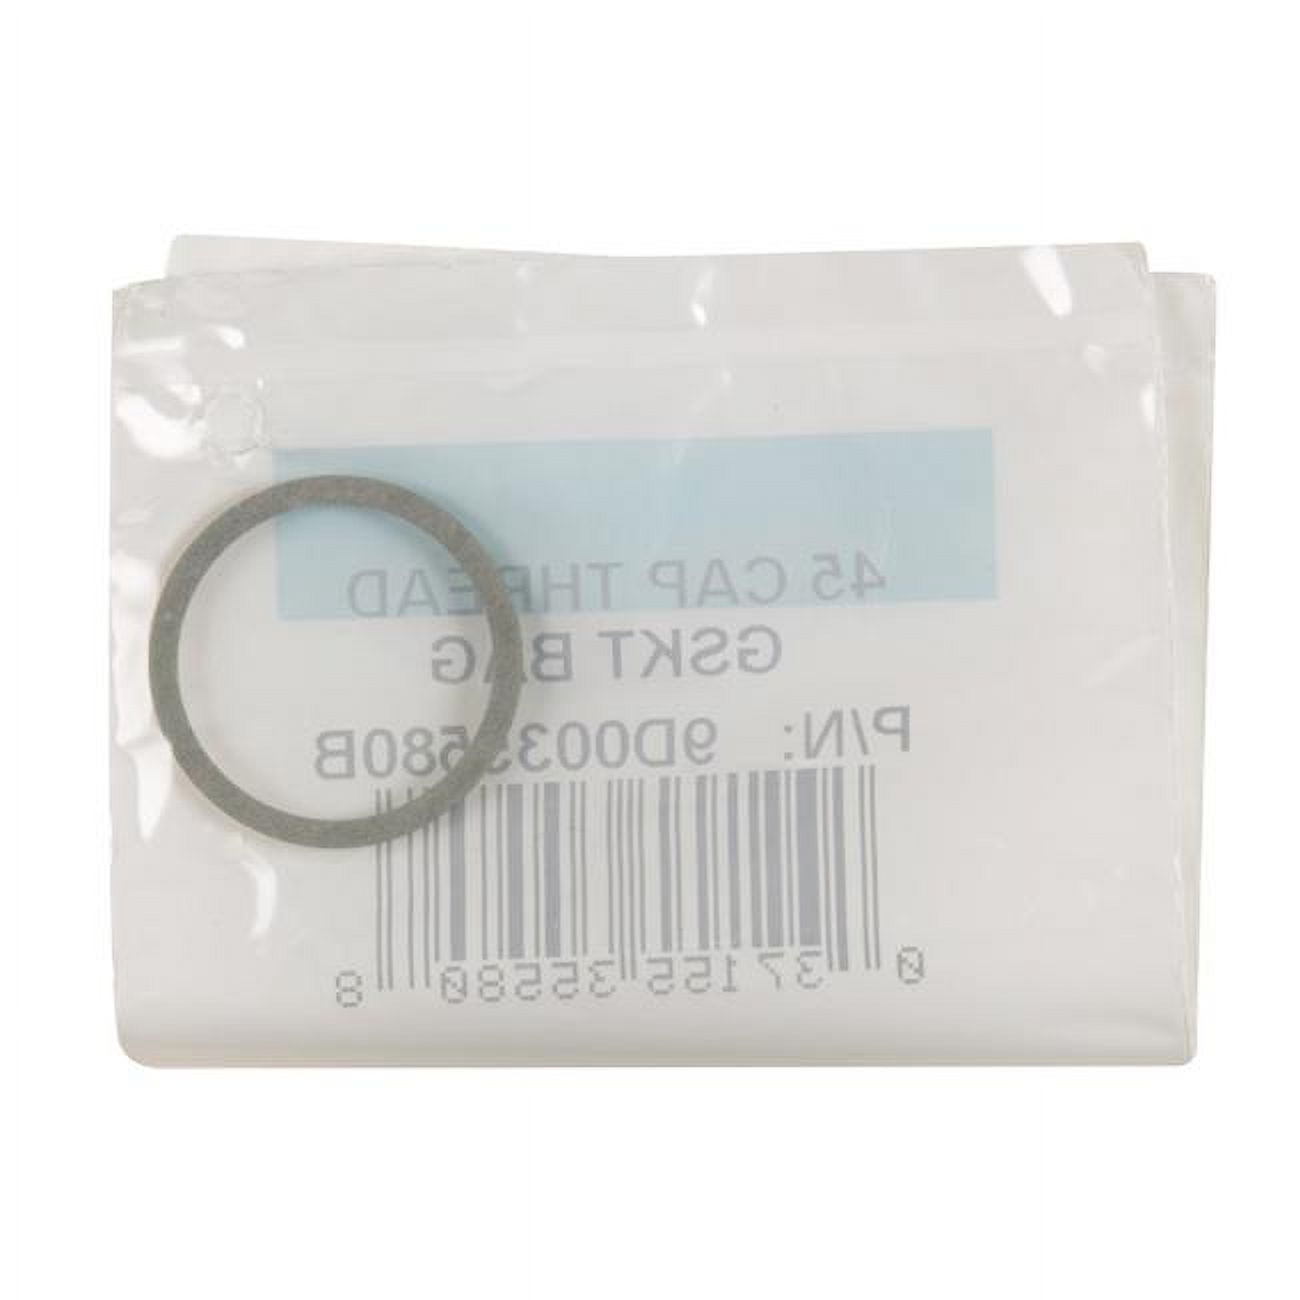 Picture of Danco 35580B No. 45 Cap Thread Gasket- pack of 5